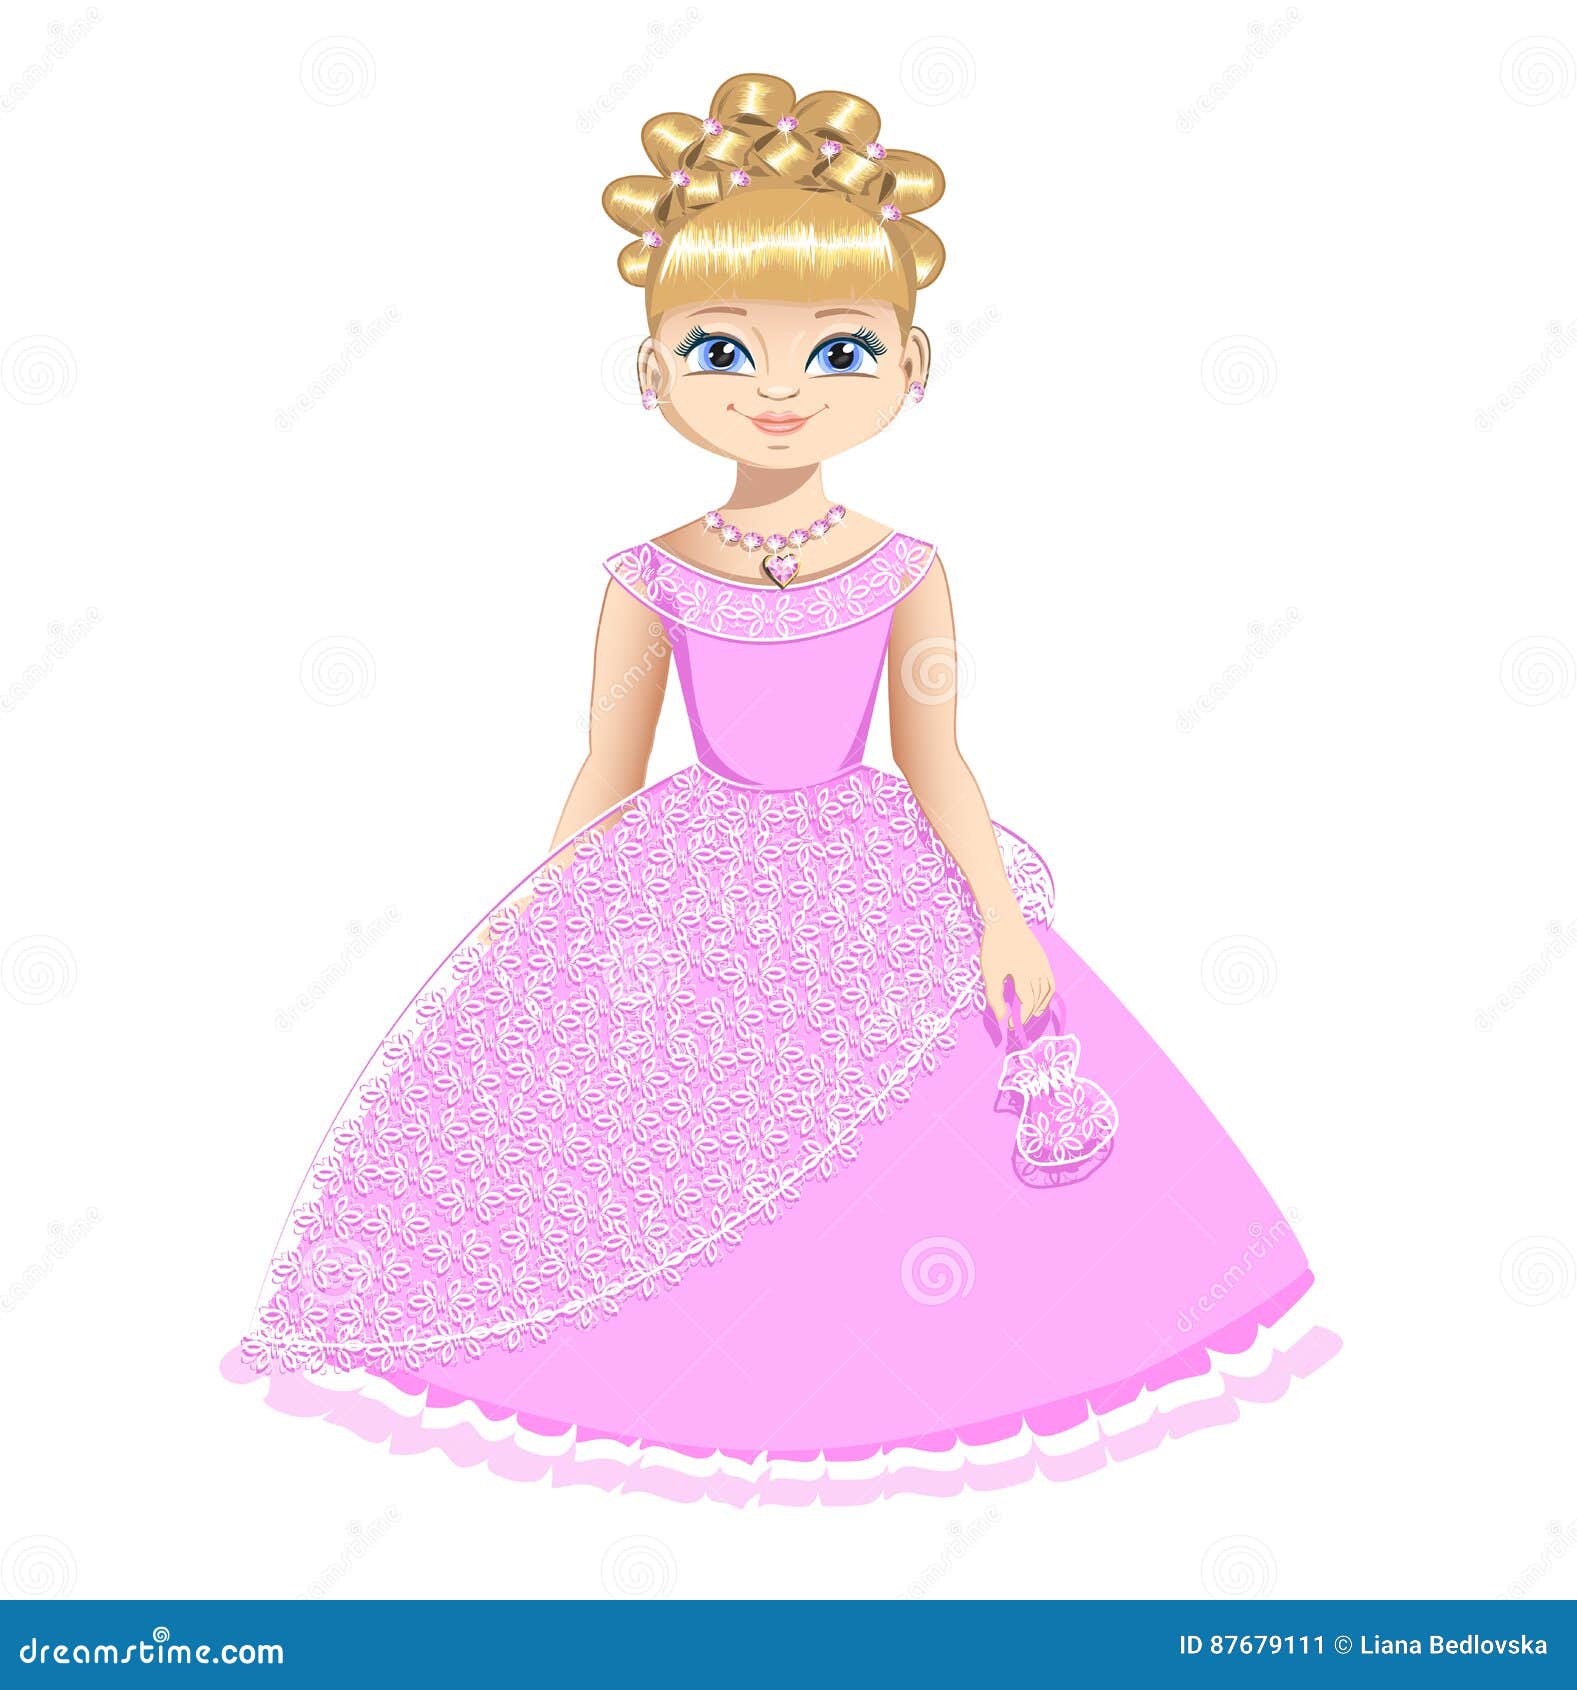 Beautiful Princess in a Pink Dress Stock Vector - Illustration of ...